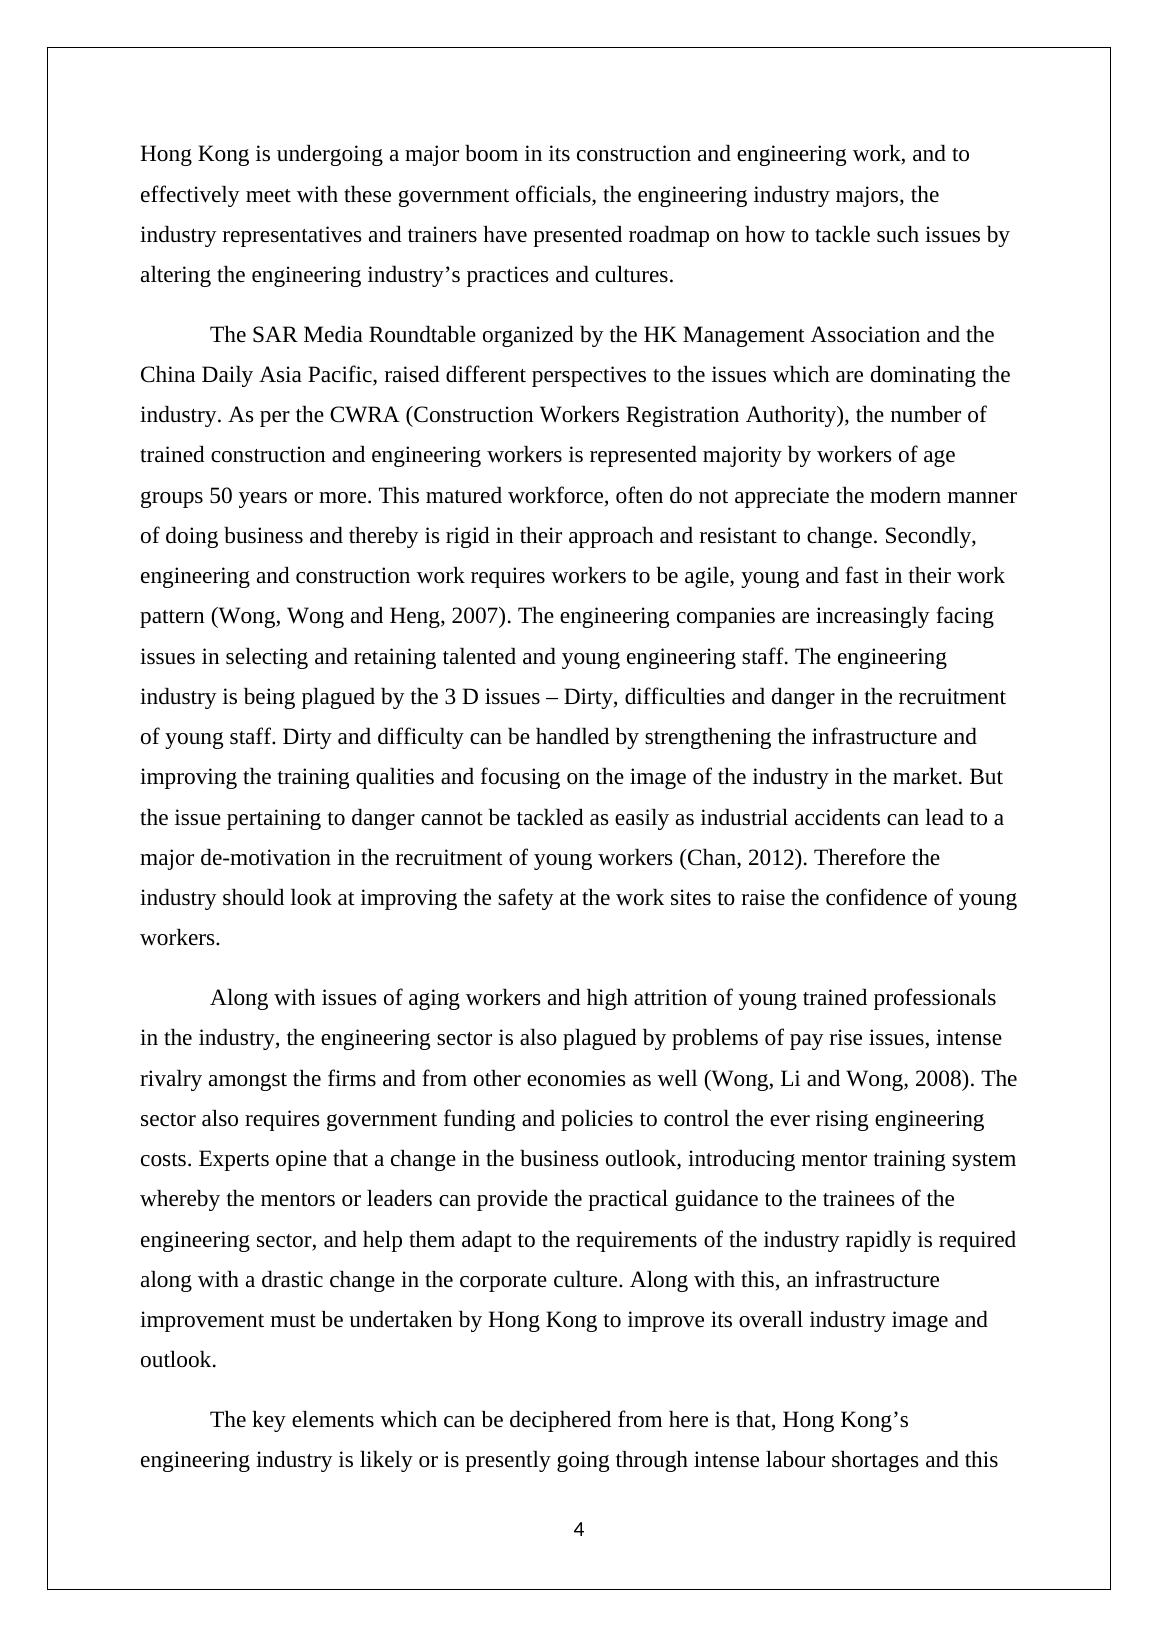 Introduction to the Literature Review of Hong Kong's Engineering Industry_4